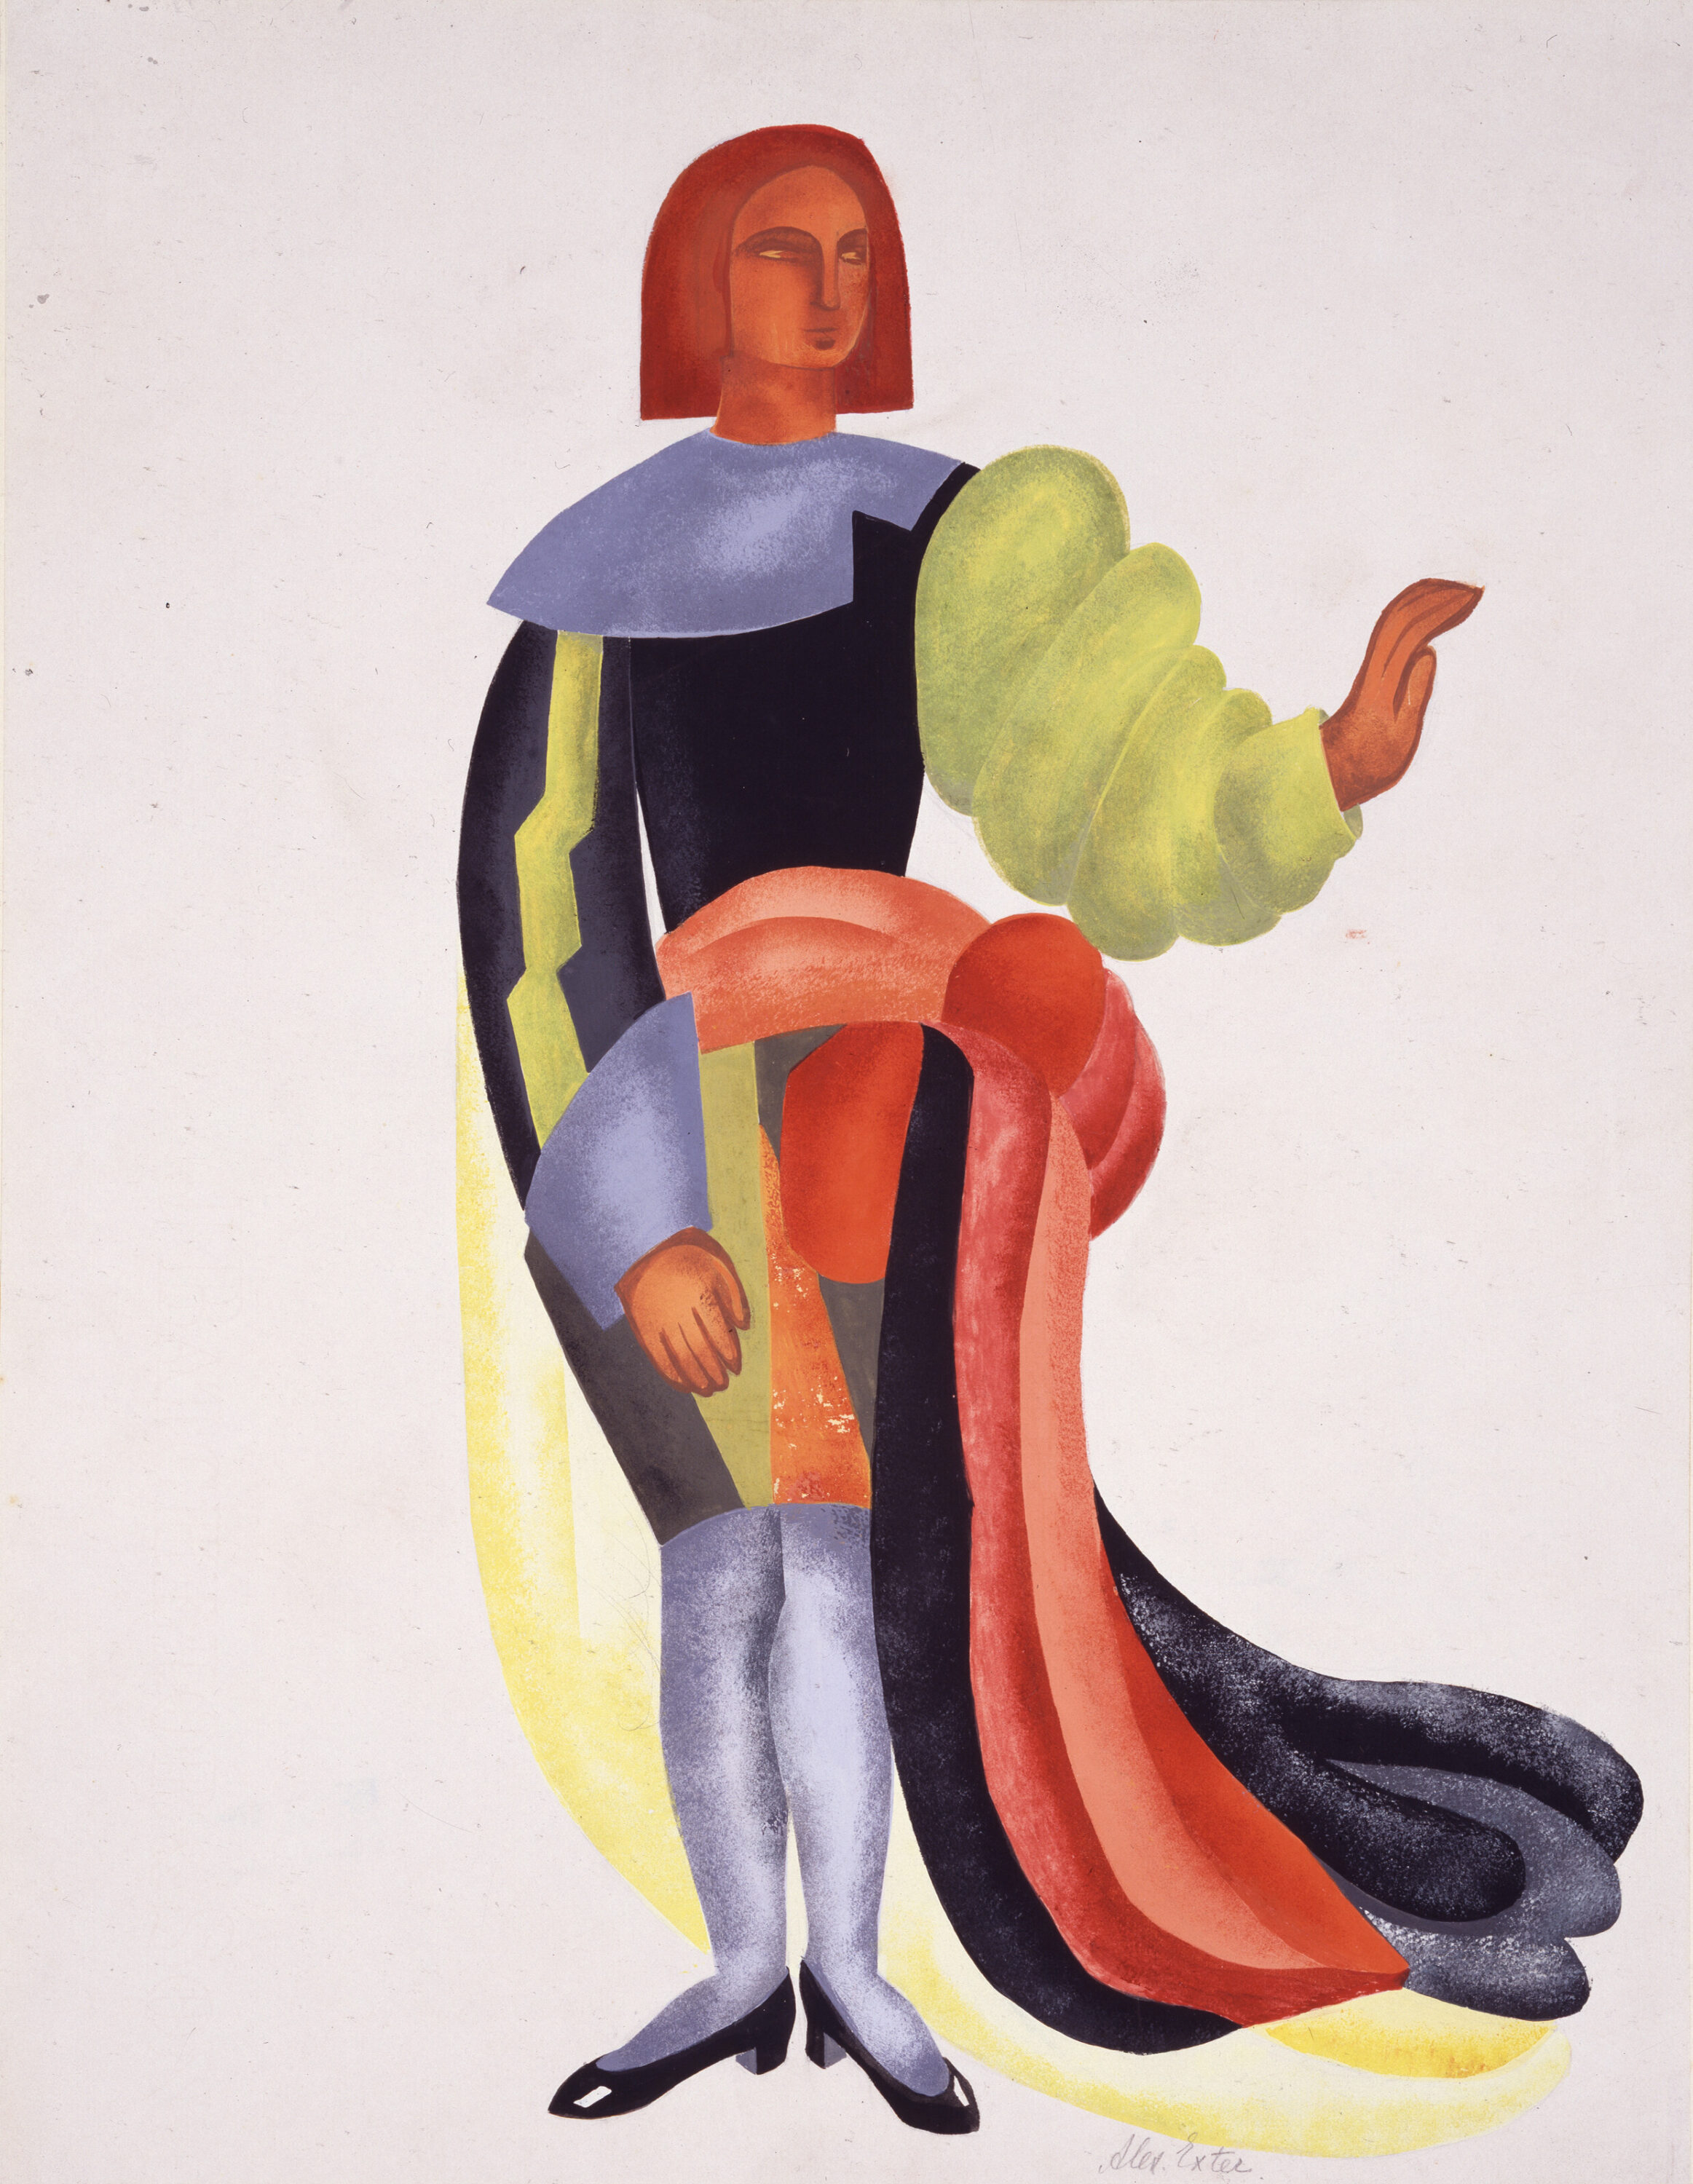 Painting of a male figure in an elaborate costume. An abstract arrangement of bright colors and unexpected forms features voluminous chartreuse left sleeve, a blue pointed cuff and lightning bolt motif on the right sleeve, and a fabric belt and multicolored train.